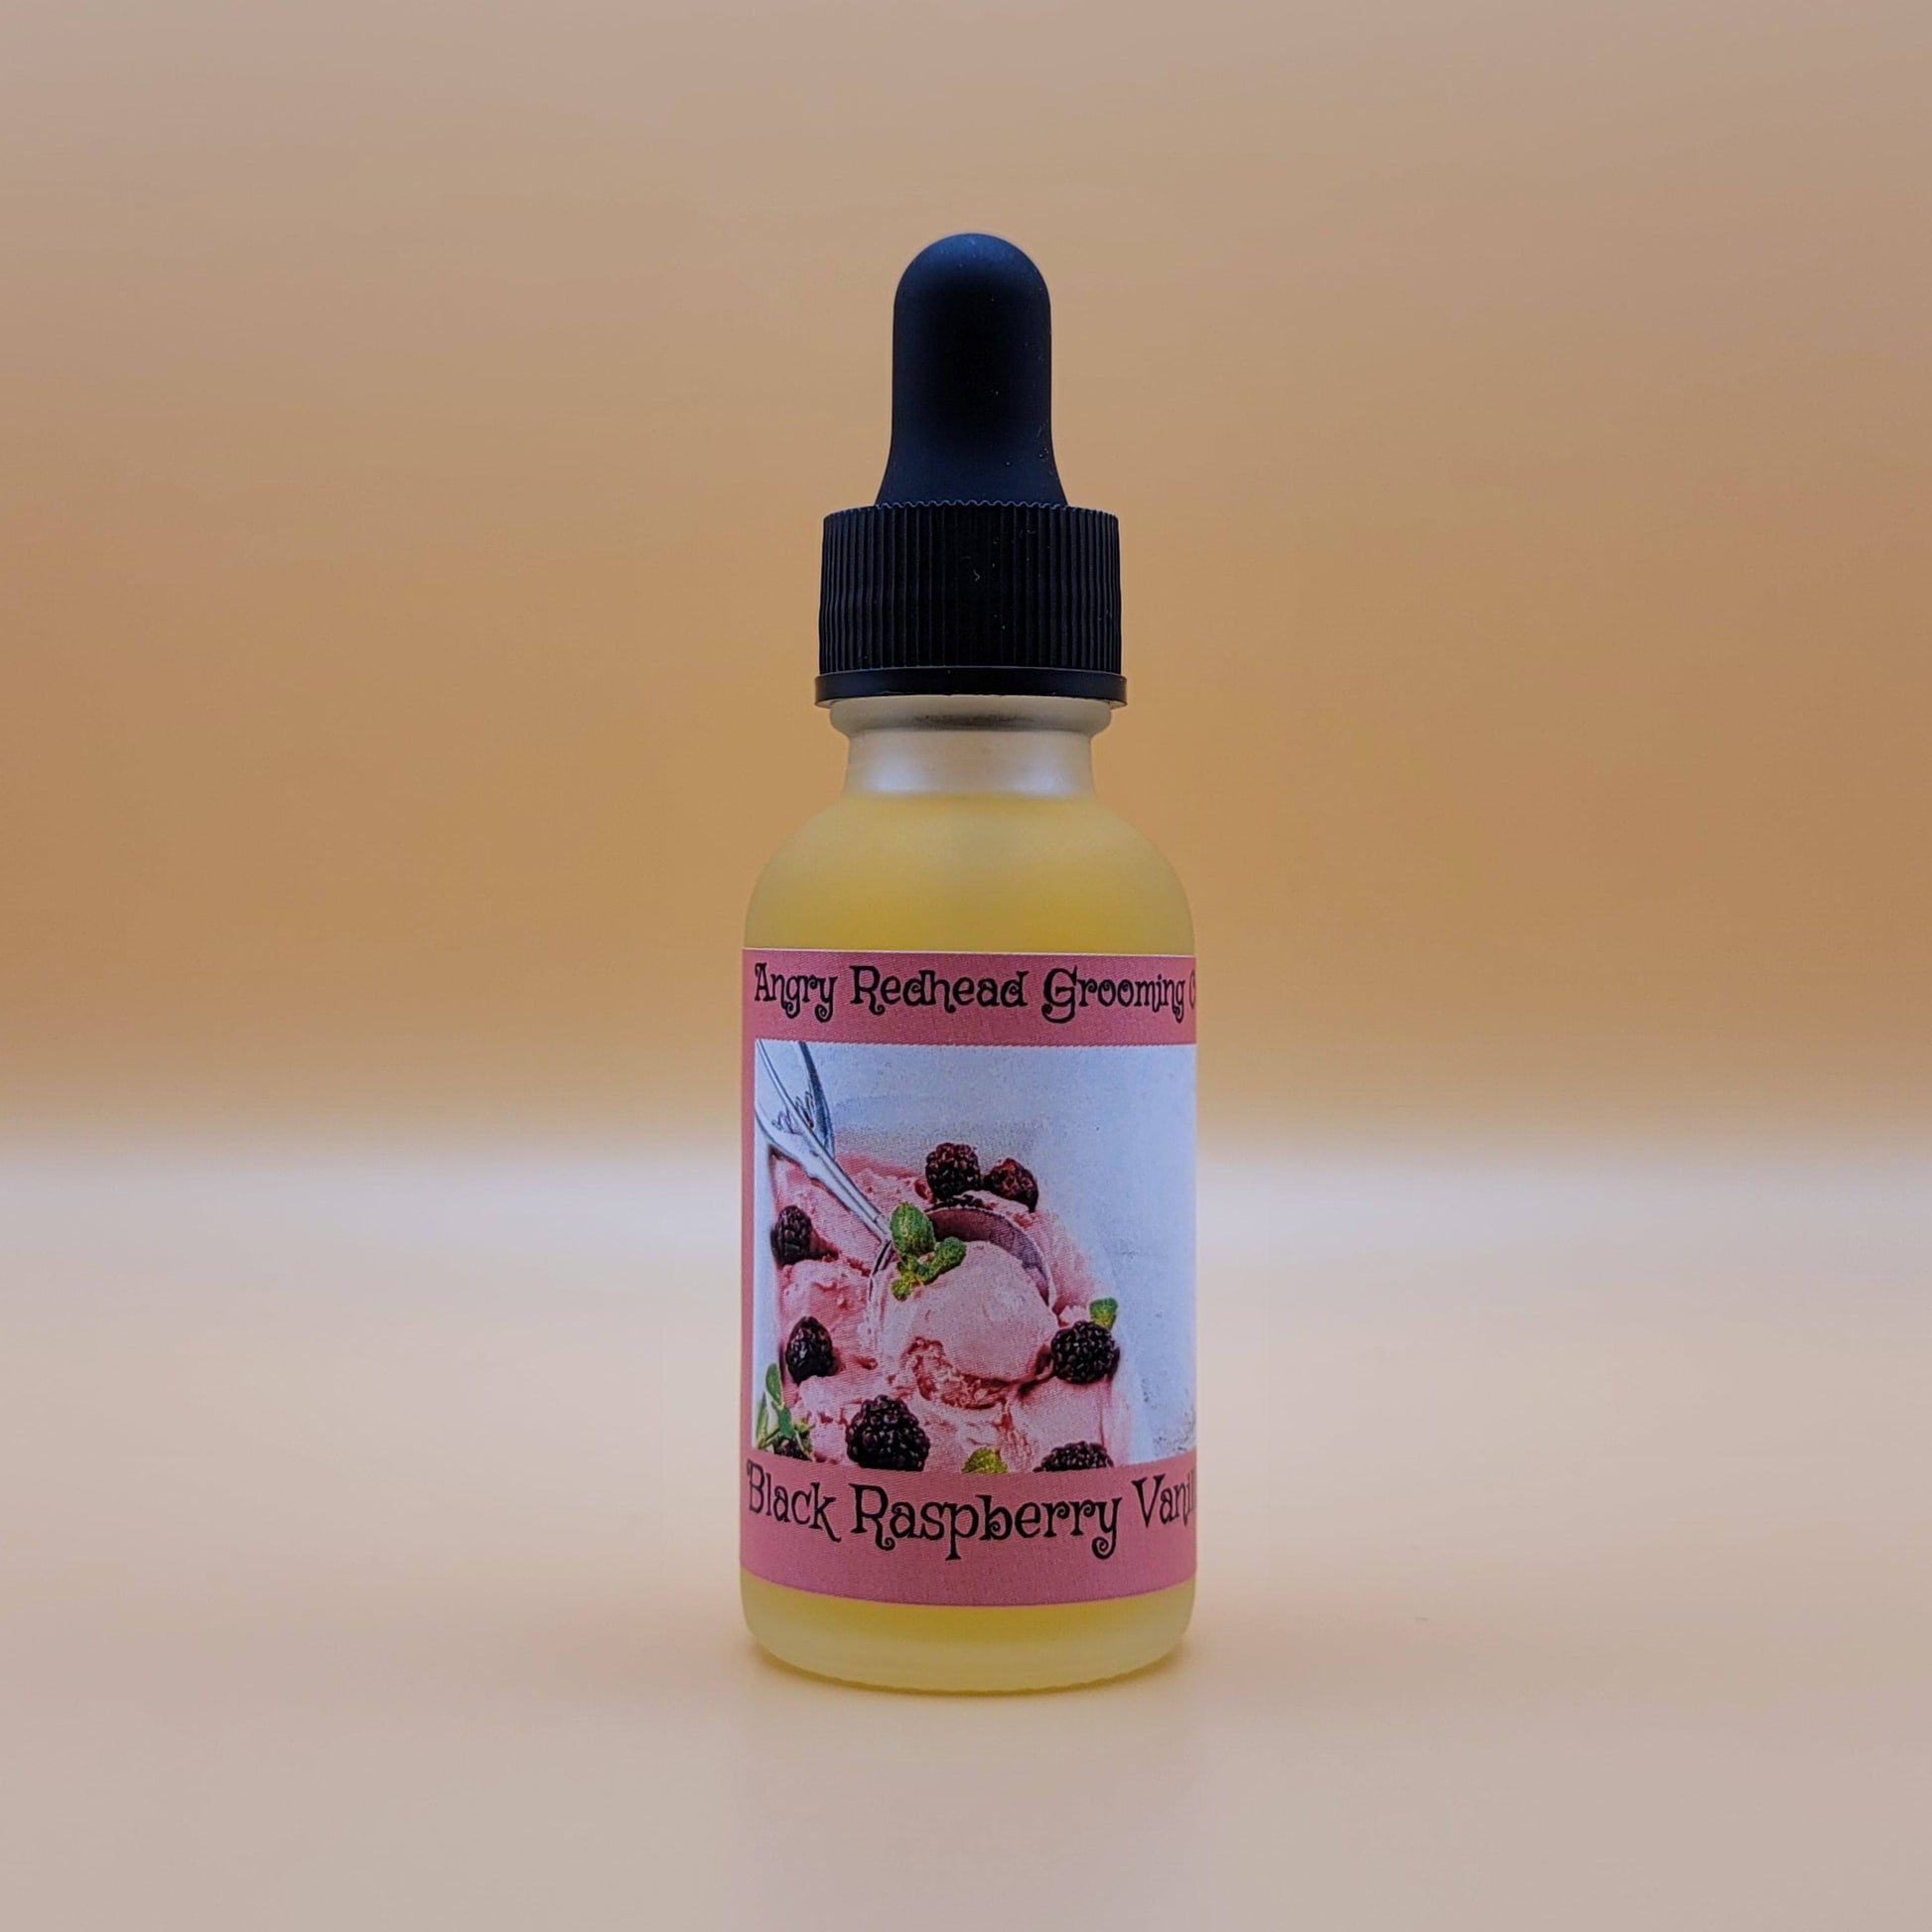 Black Raspberry Vanilla Pre-Shave Oil by Angry Redhead Grooming Co - angryredheadgrooming.com